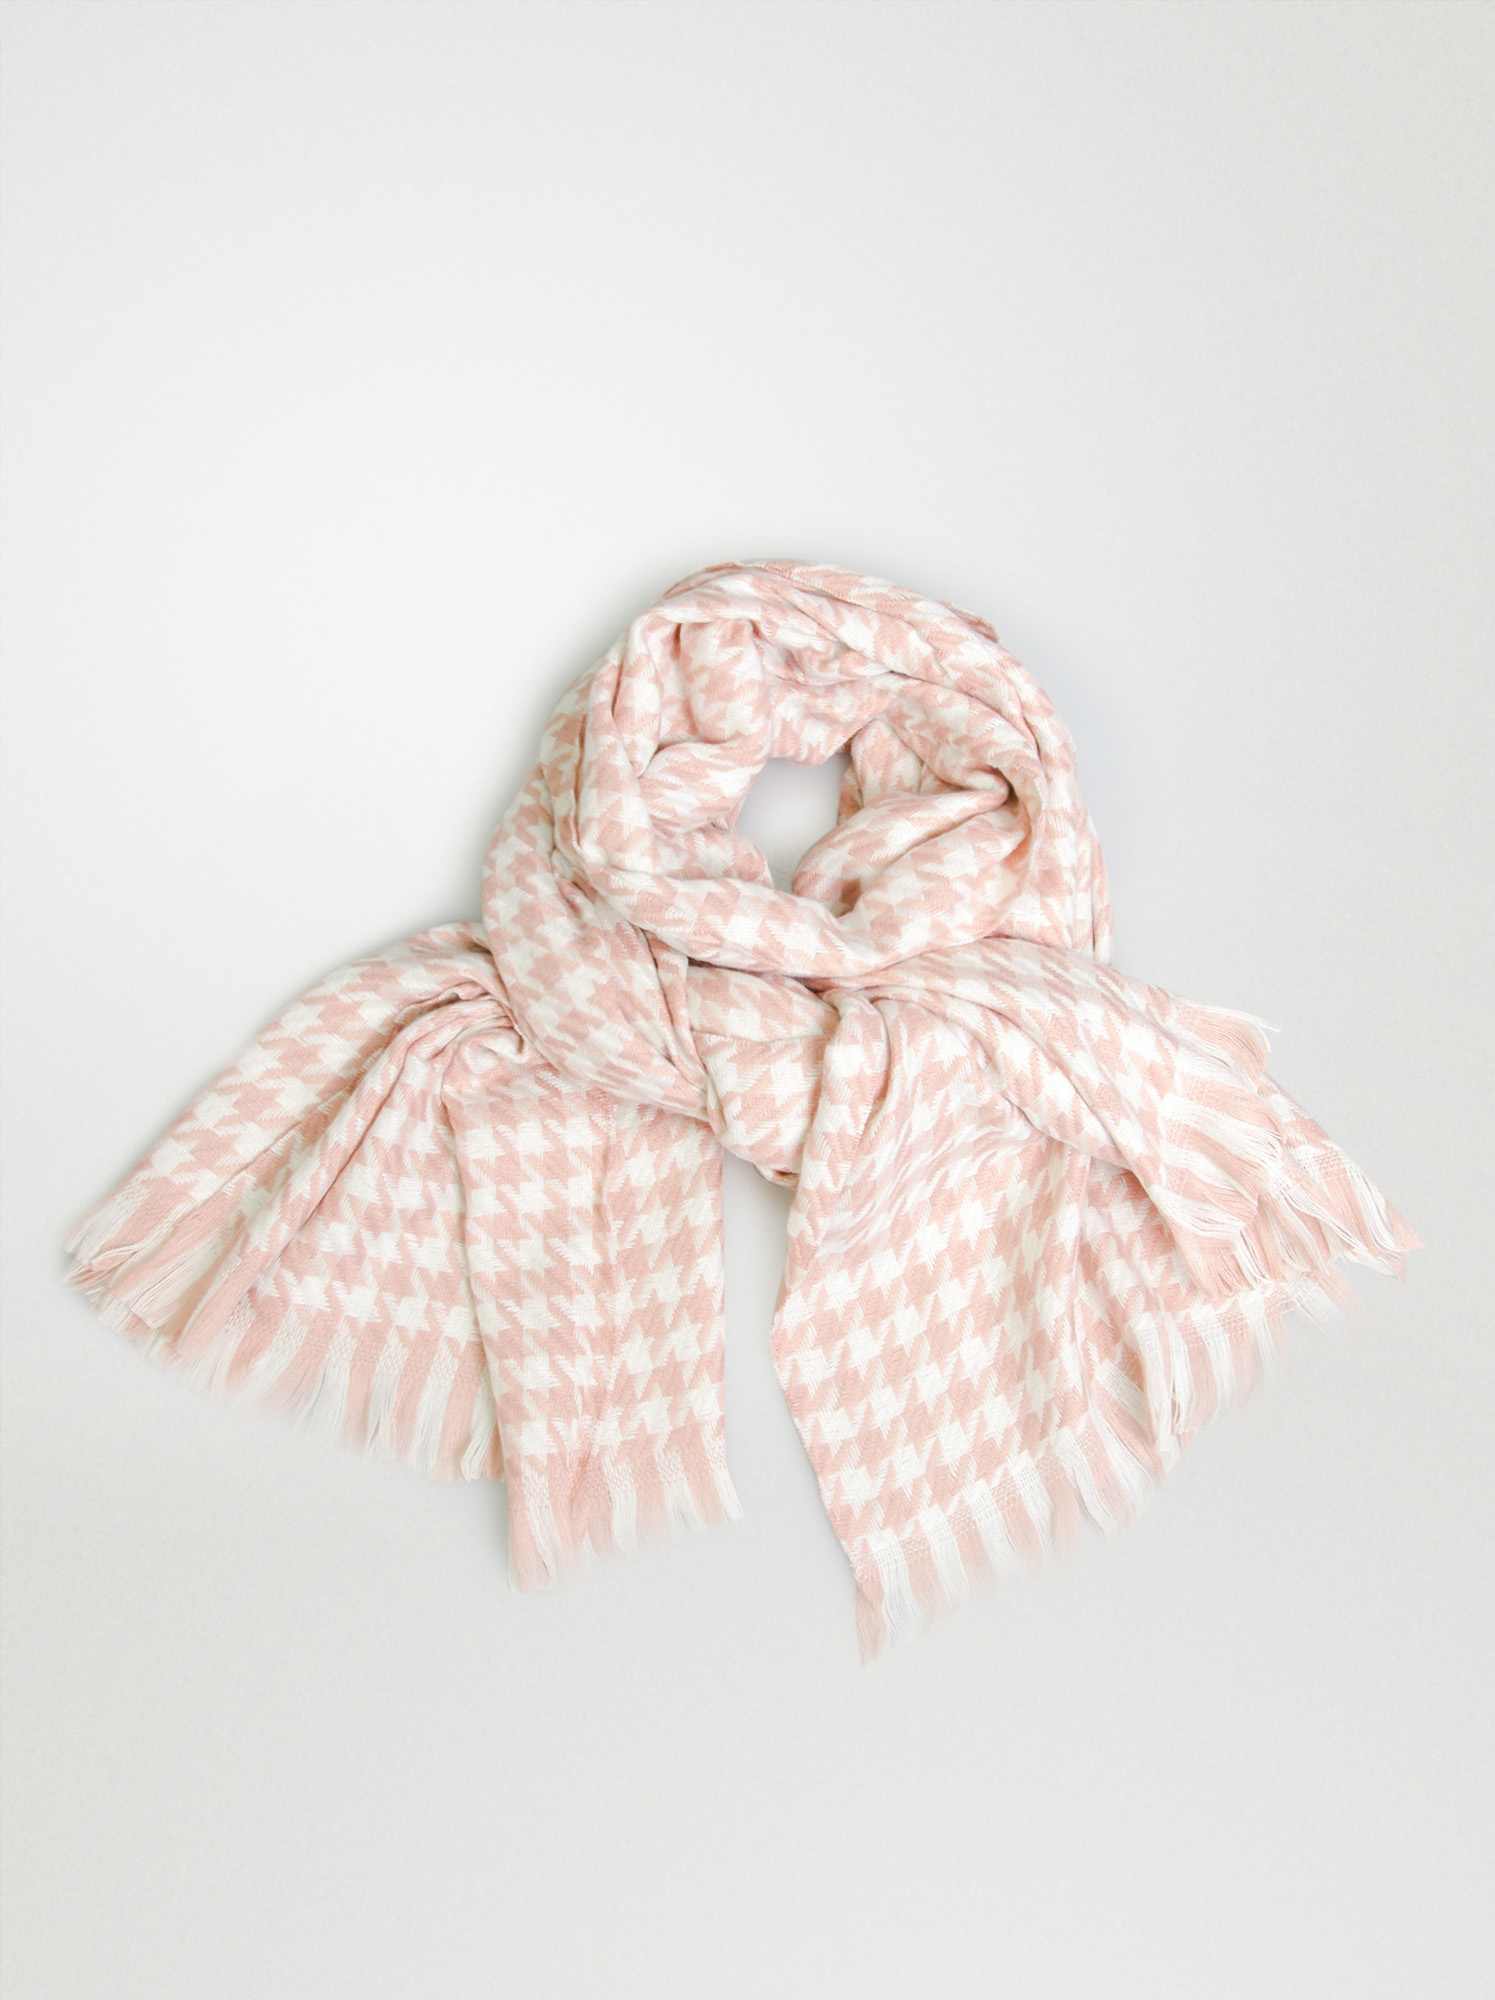 Houndstooth scarf image 1